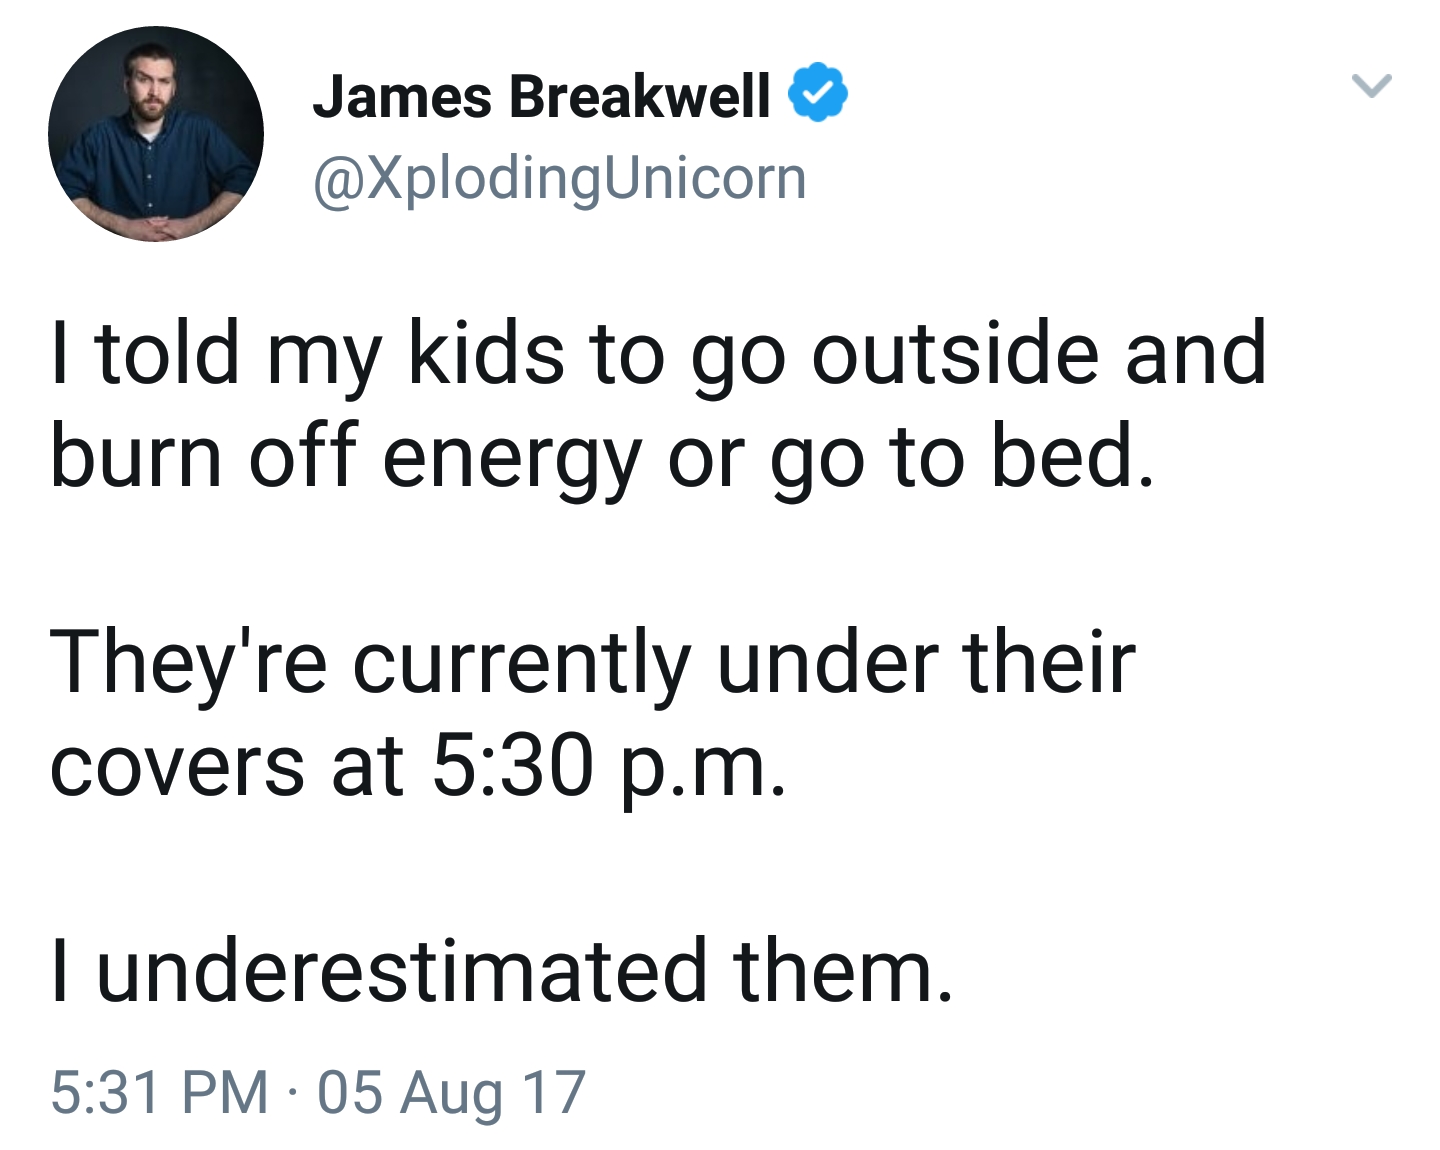 angle - James Breakwell I told my kids to go outside and burn off energy or go to bed. They're currently under their covers at p.m. I underestimated them. 05 Aug 17